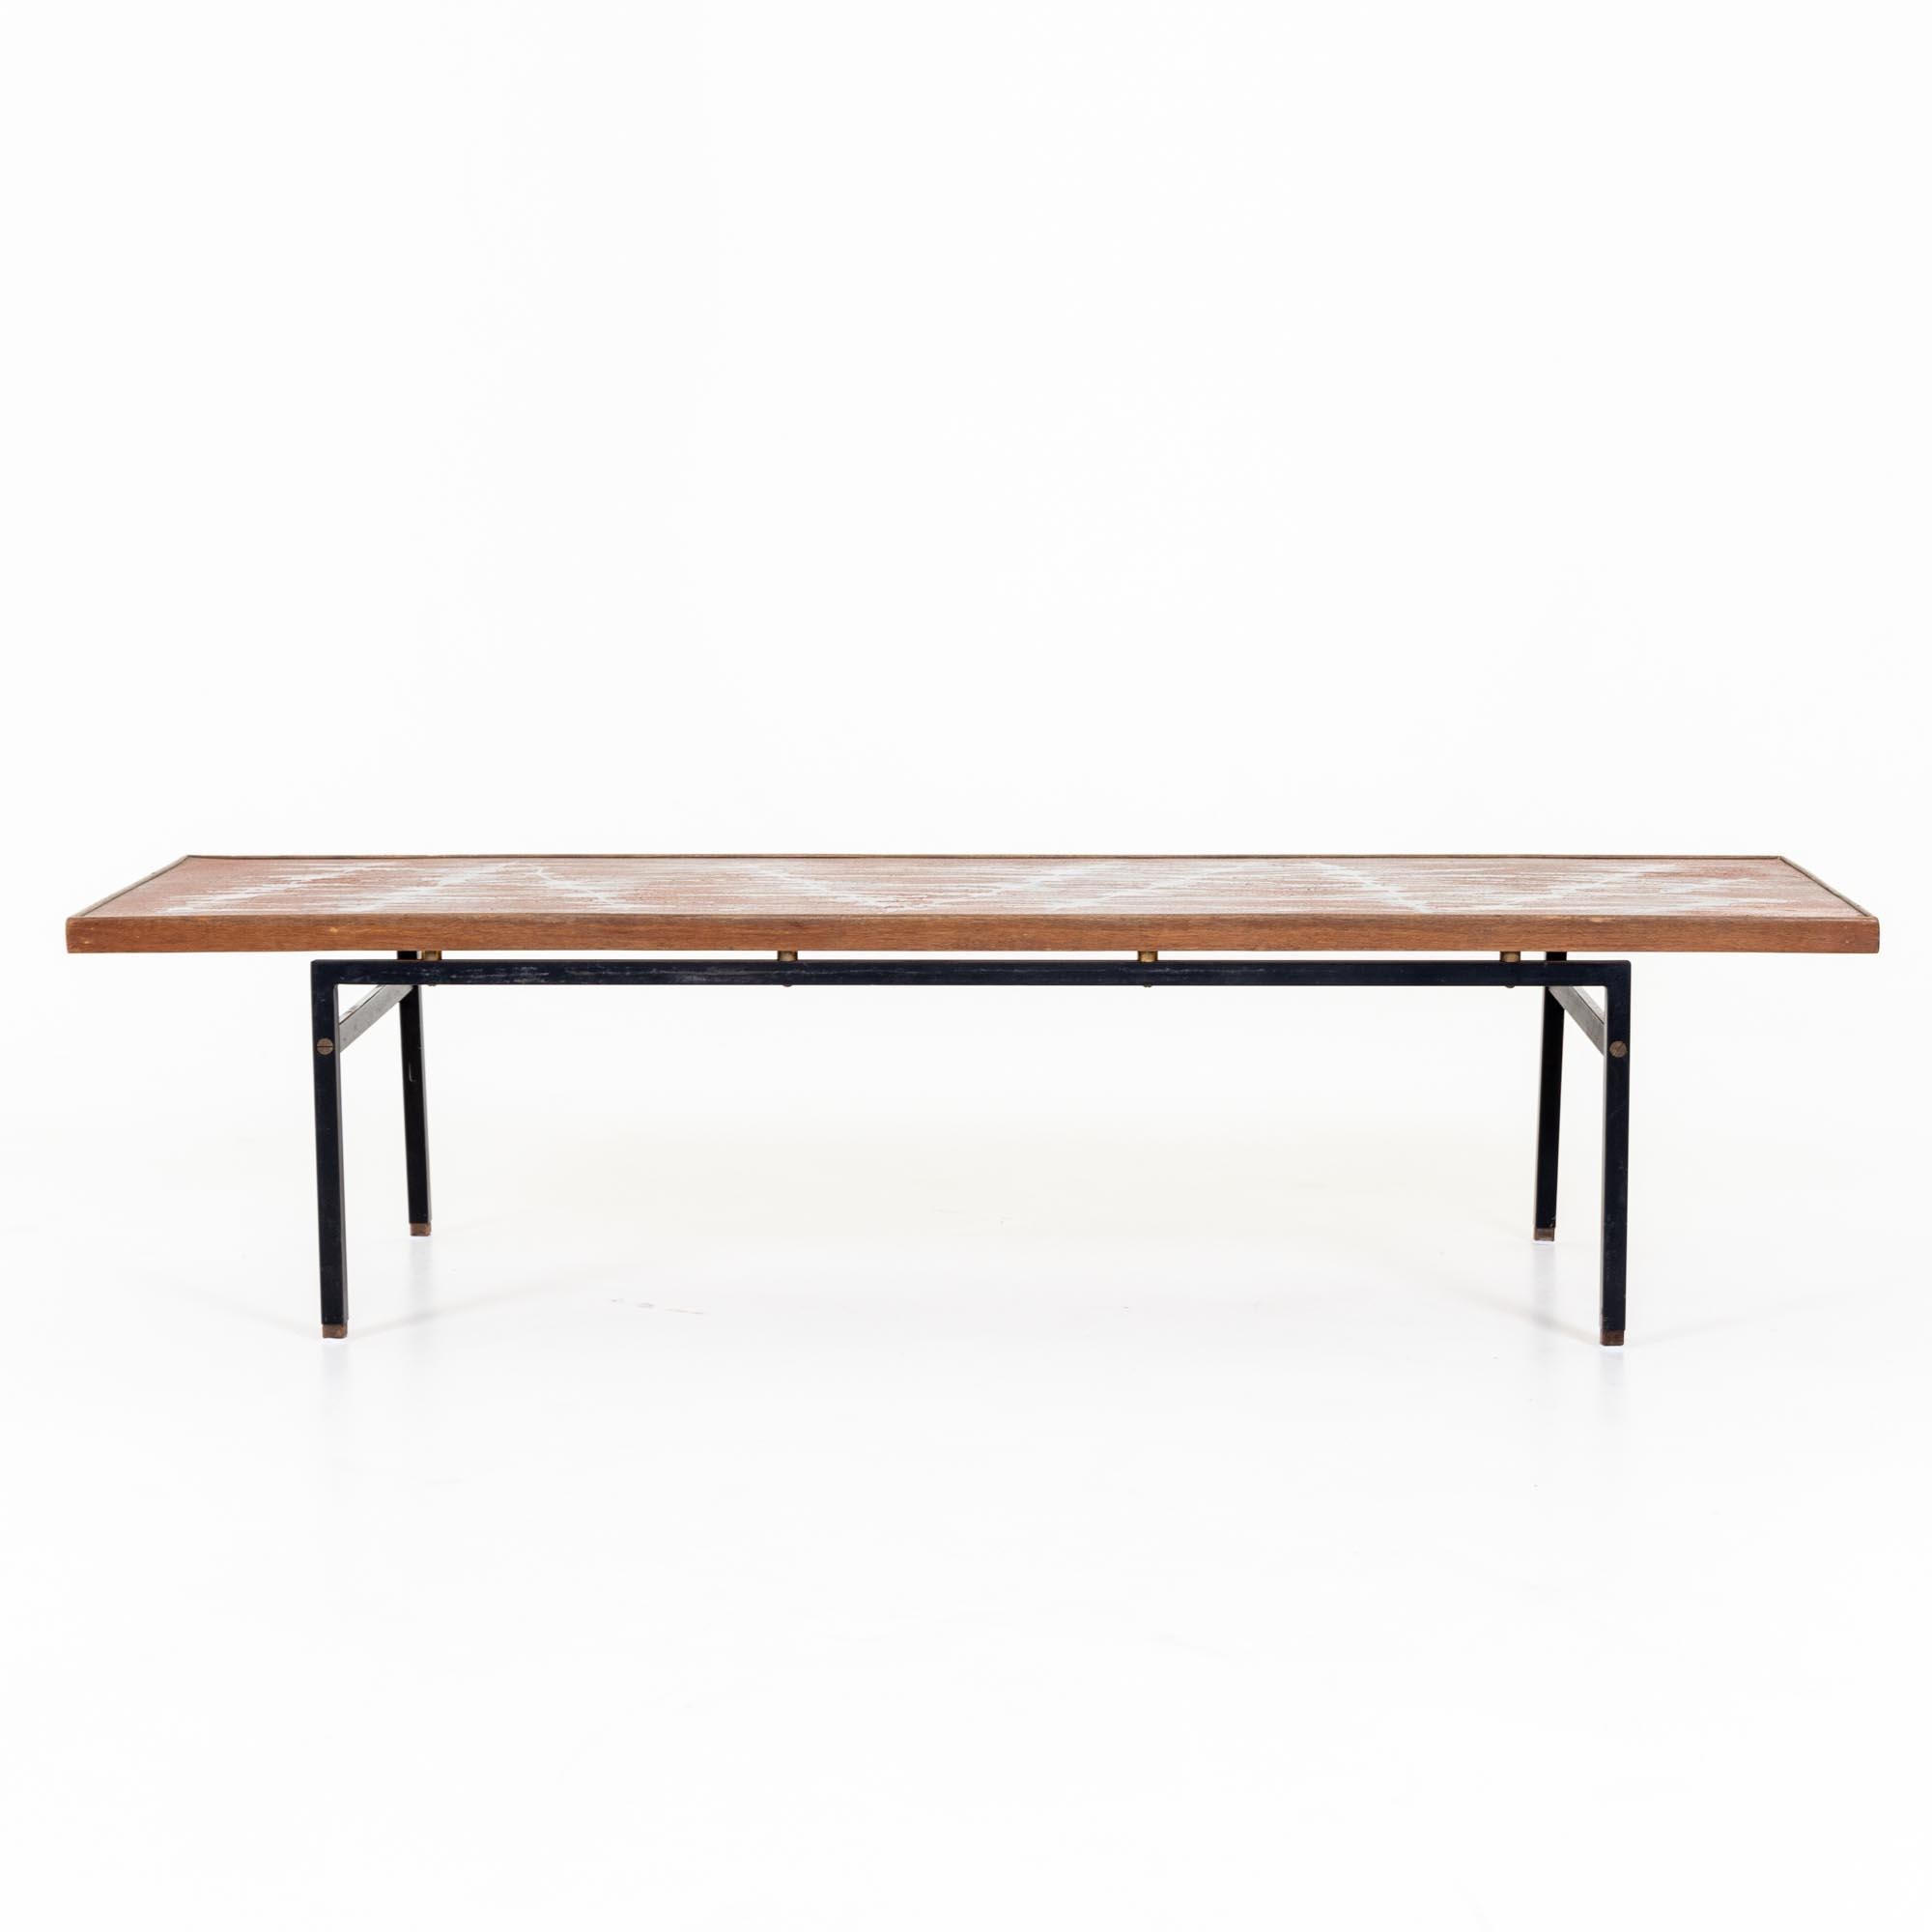 Late 20th Century Modernist Coffee Table For Sale